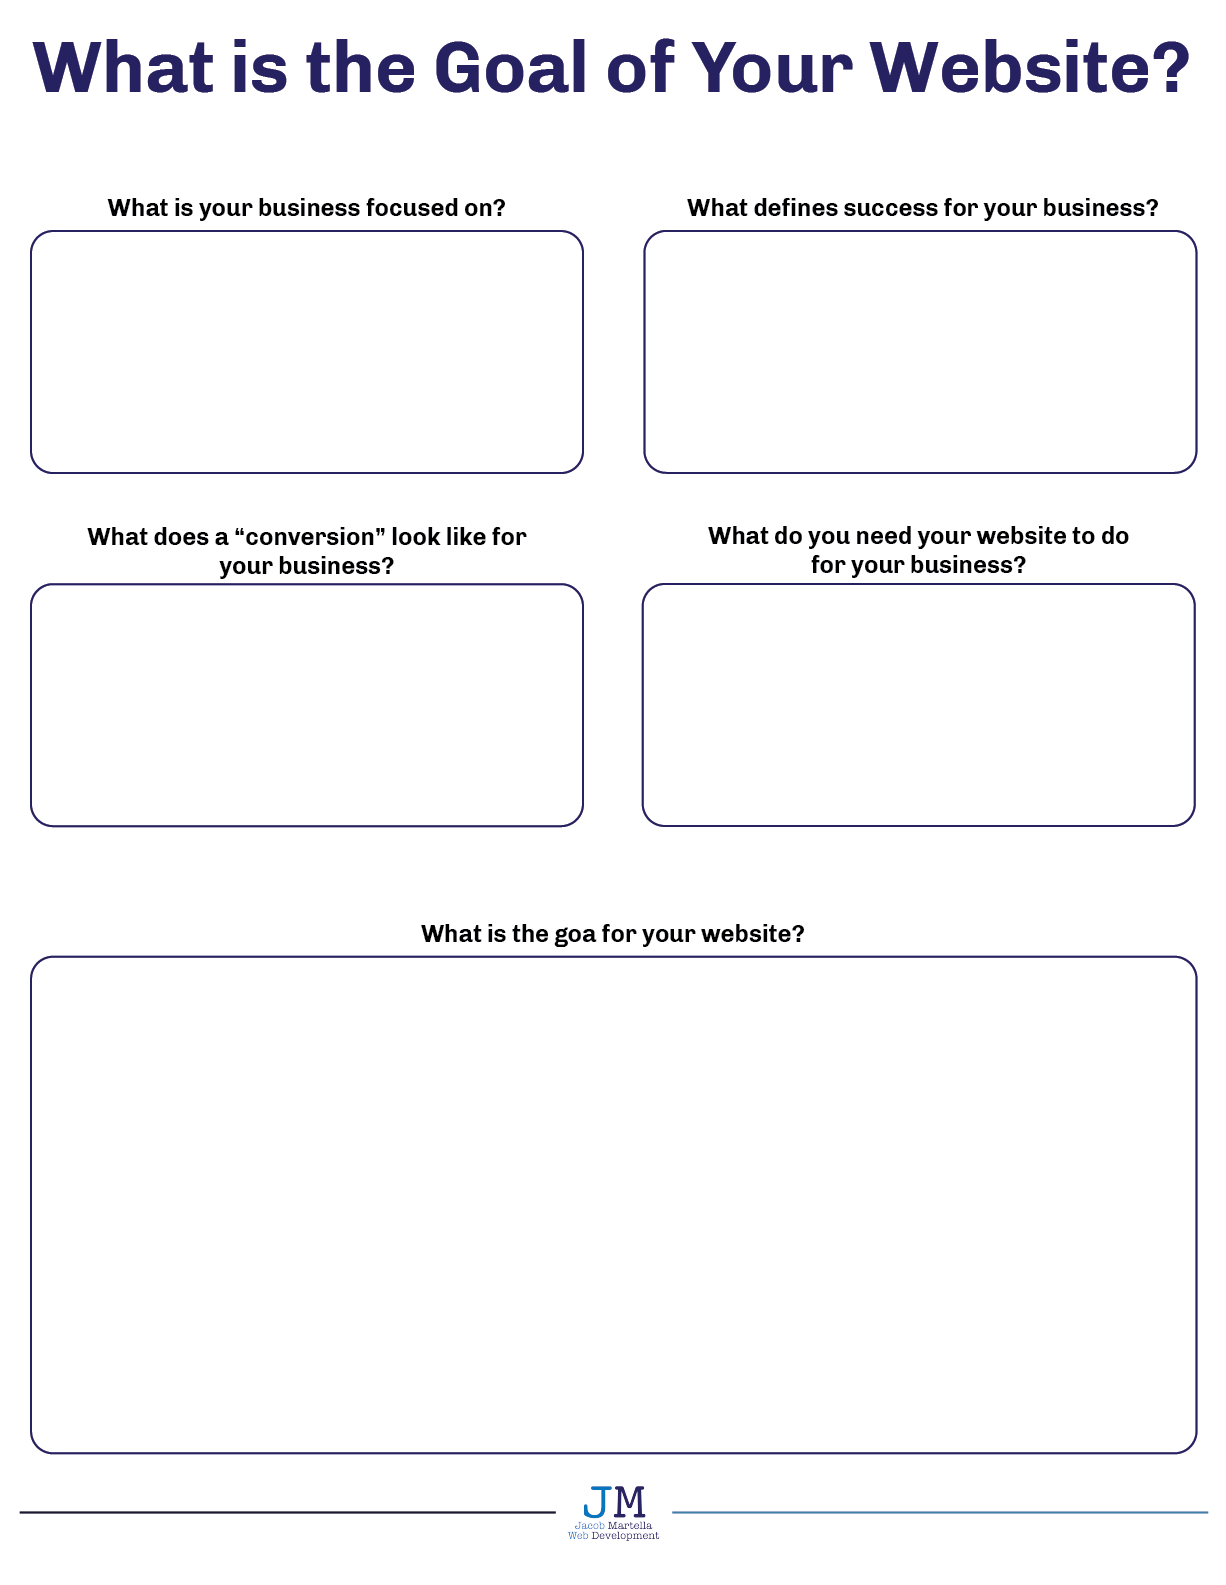 “What is the Goal of Your Website” Worksheet